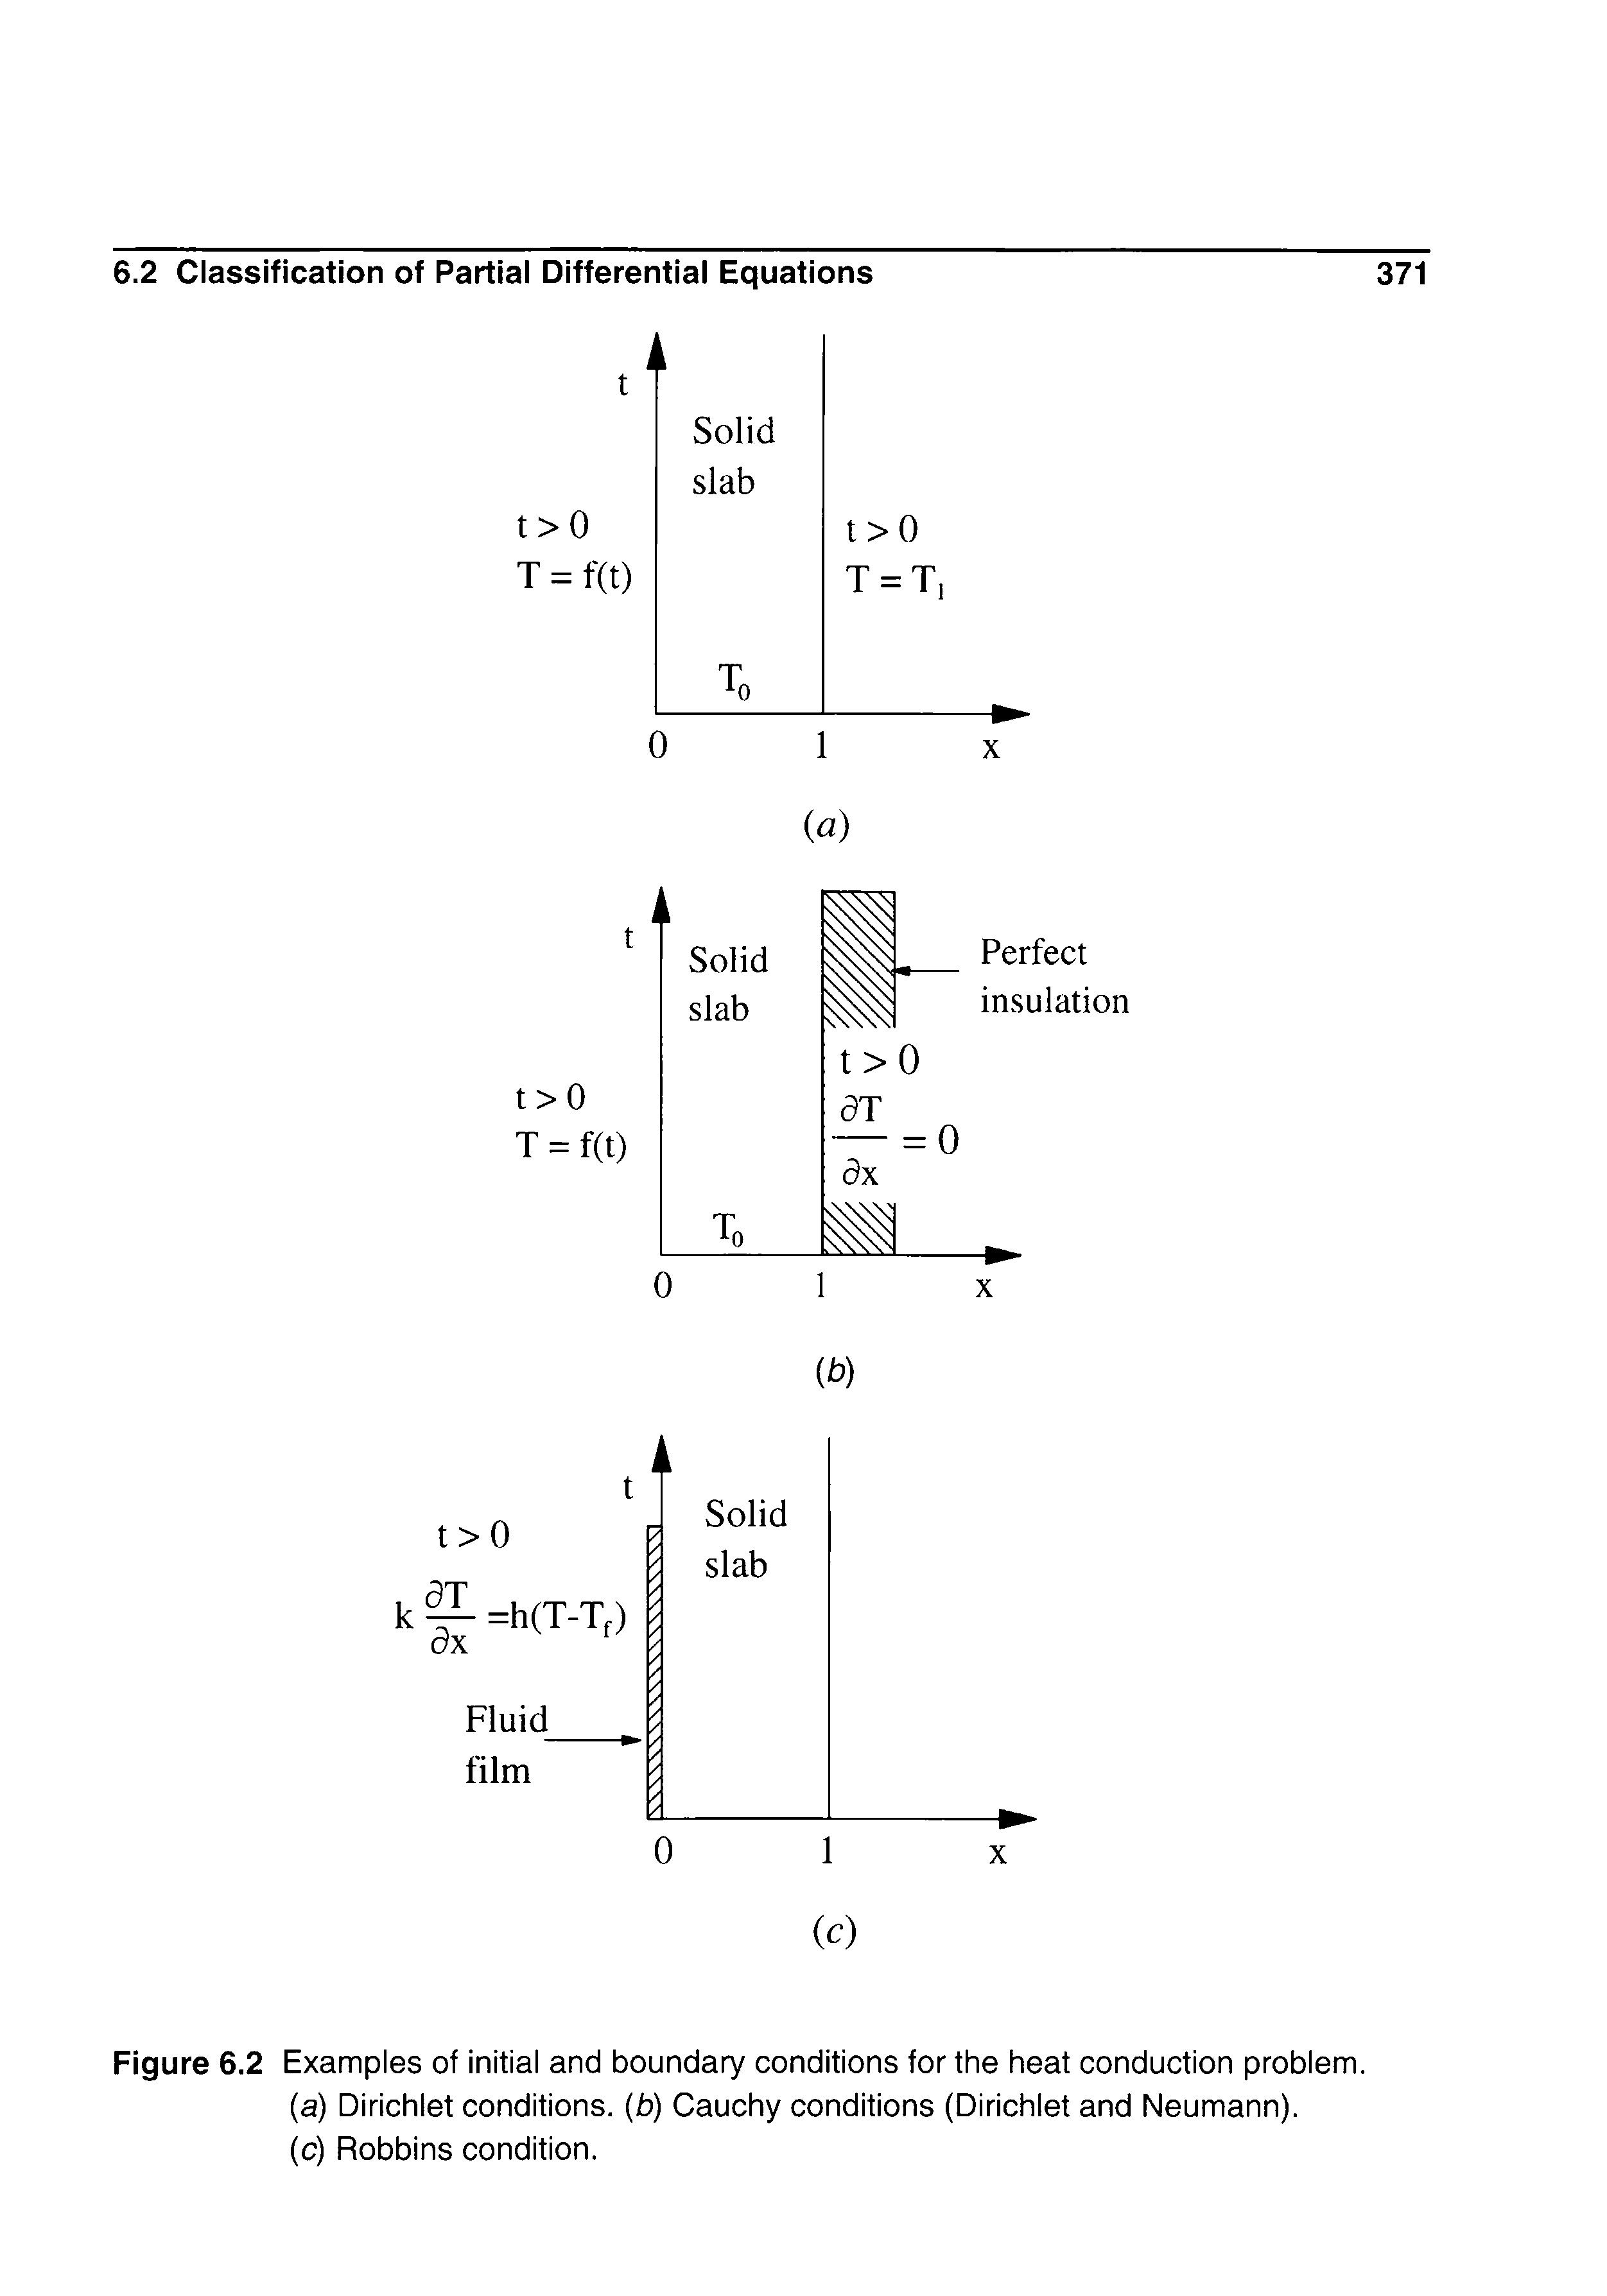 Figure 6.2 Examples of initial and boundary conditions for the heat conduction problem, (a) Dirichlet conditions, (b) Cauchy conditions (Dirichlet and Neumann).